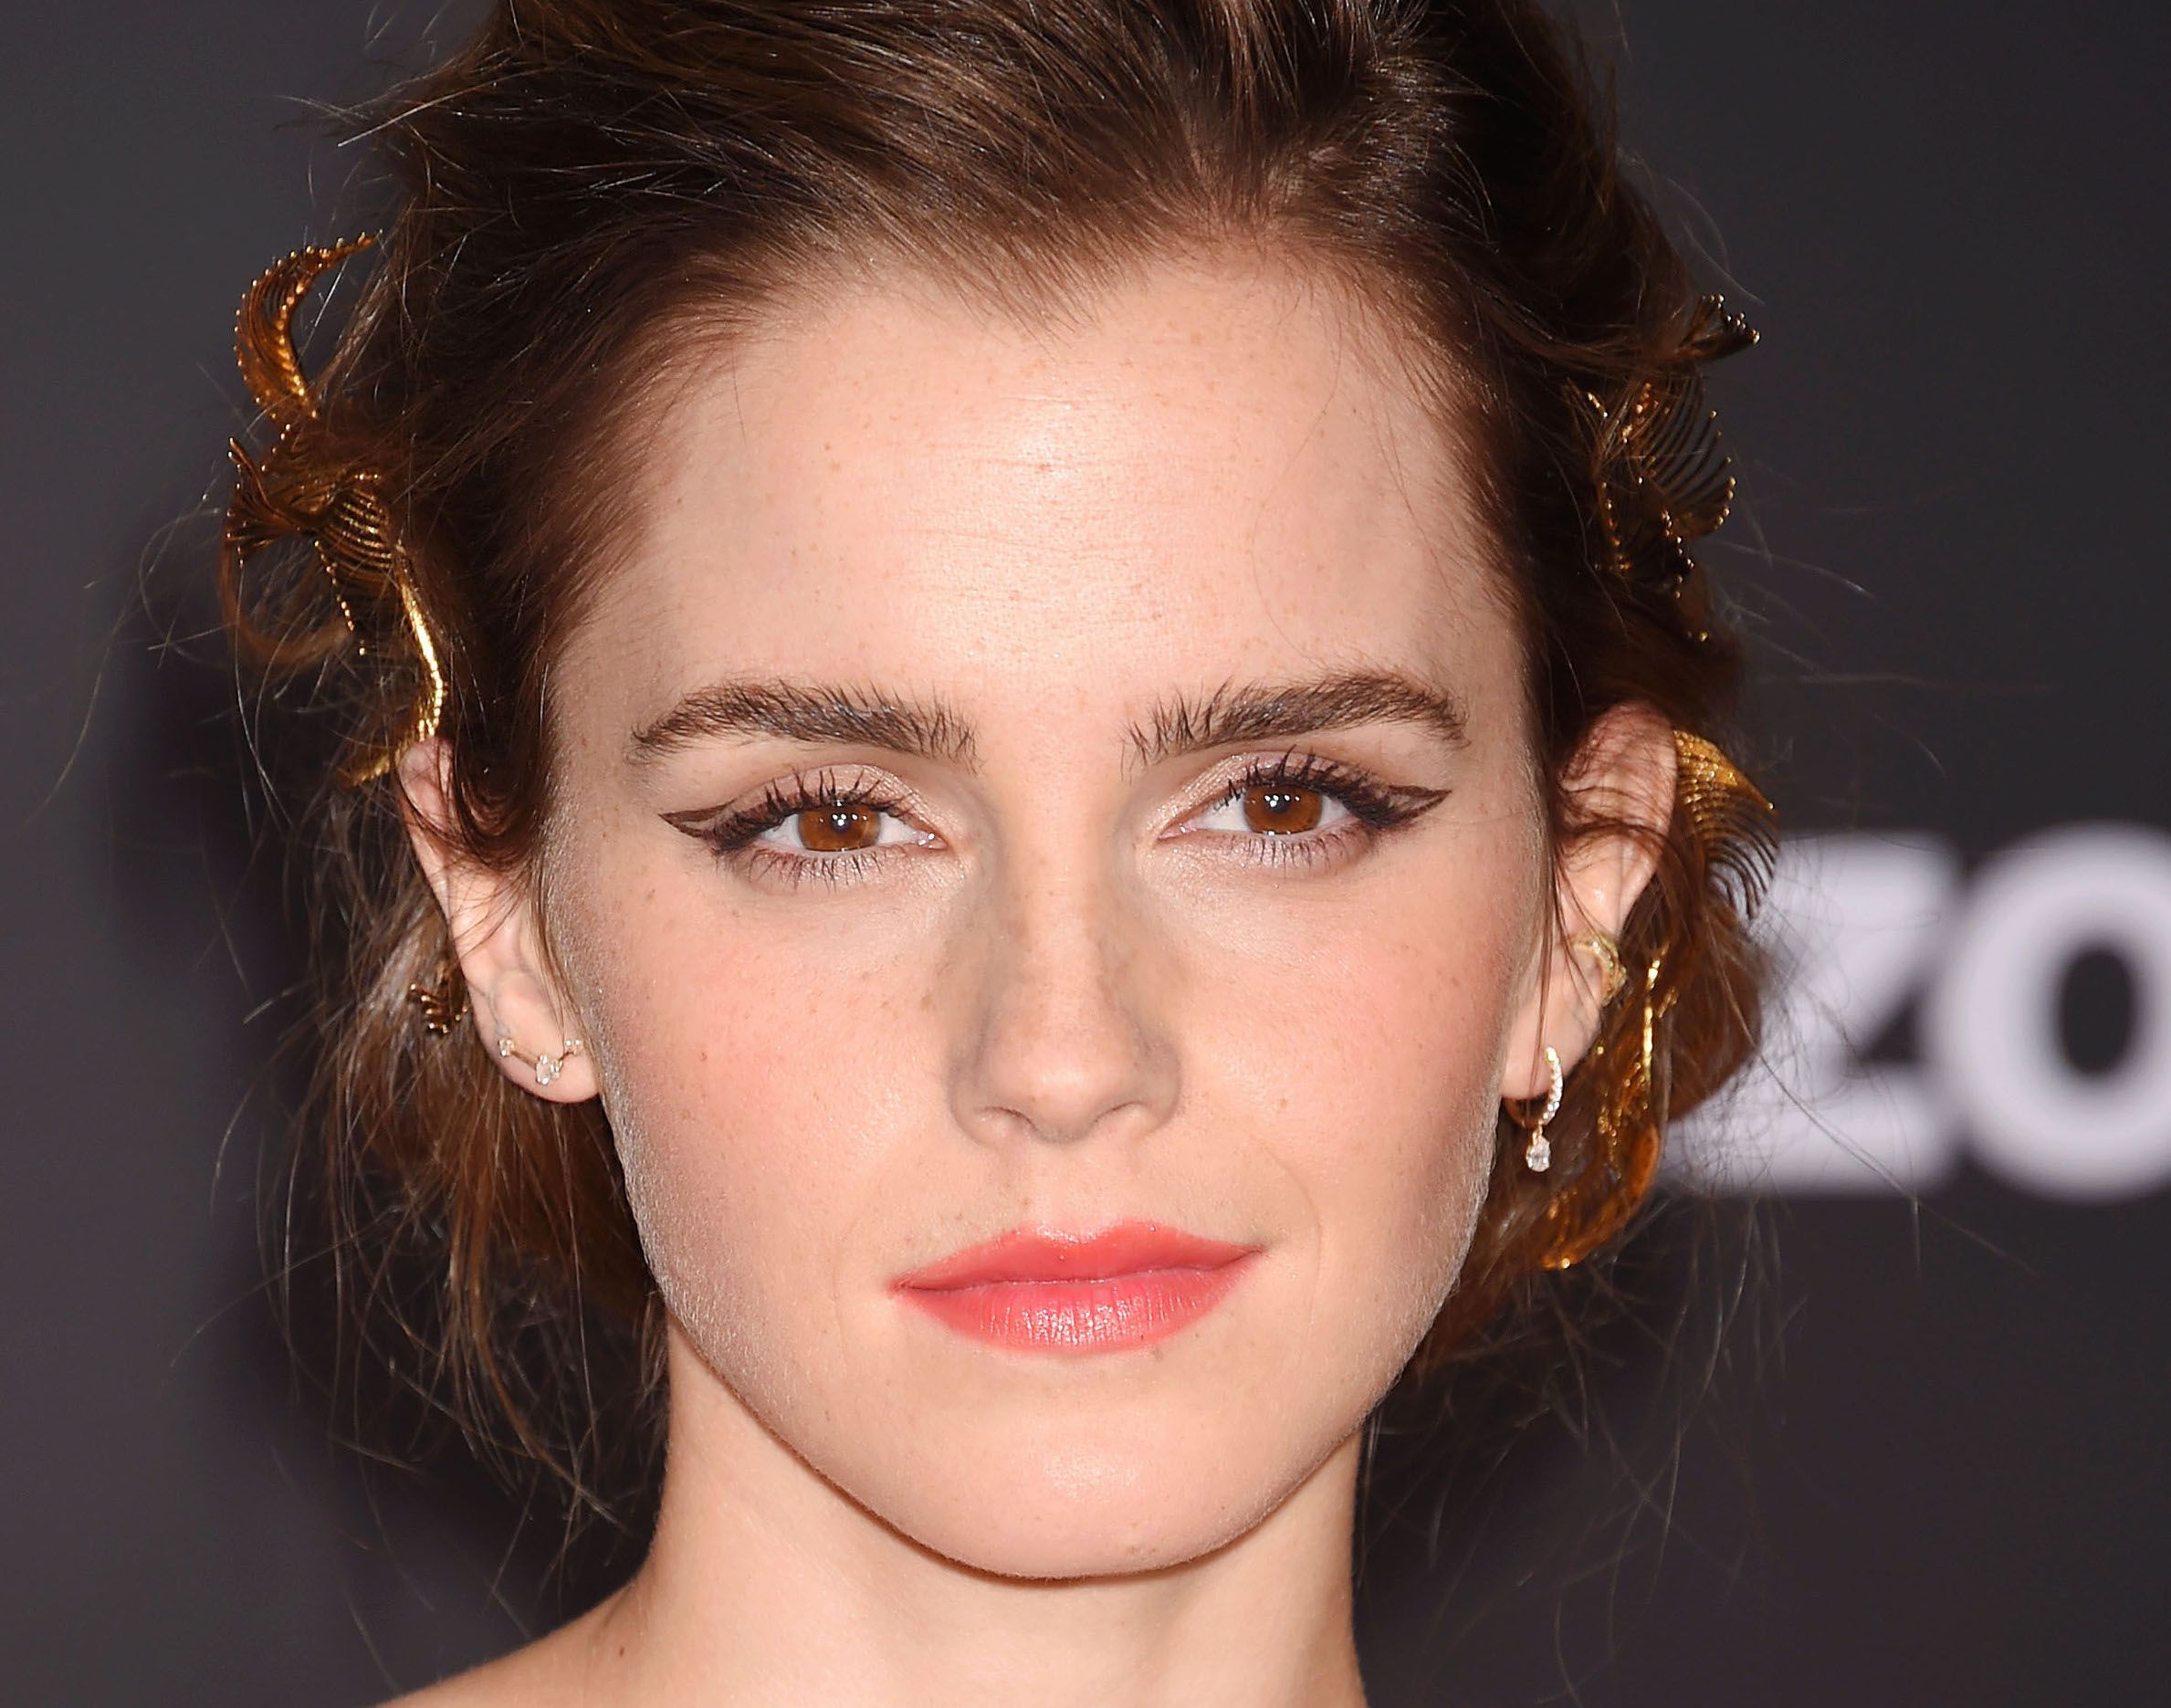 Emma Watson on pubic hair and bleaching her moustache image pic